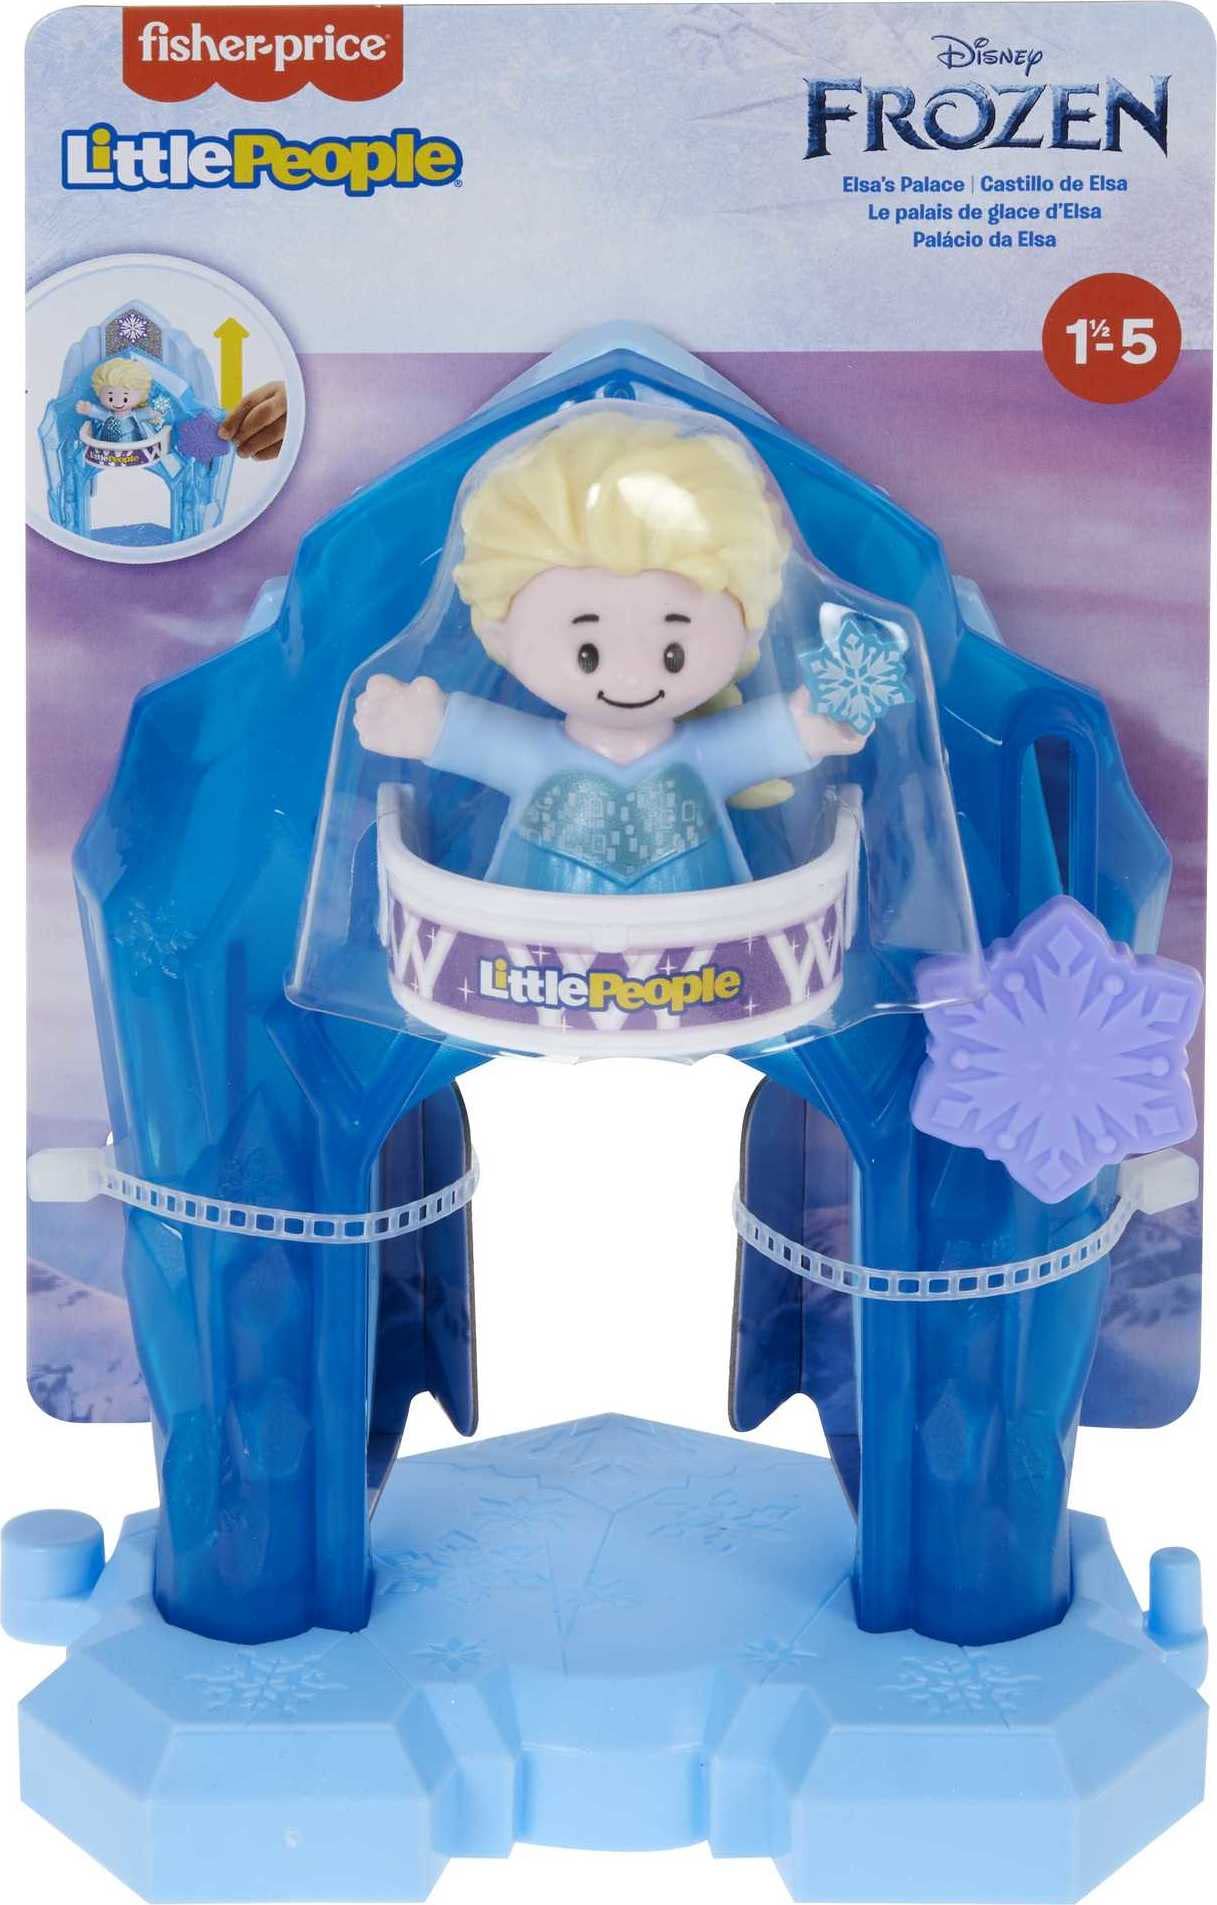 Fisher-Price Little People Toddler Toys Disney Frozen Elsa’s Palace Portable Playset with Figure for Preschool Kids Ages 18+ Months